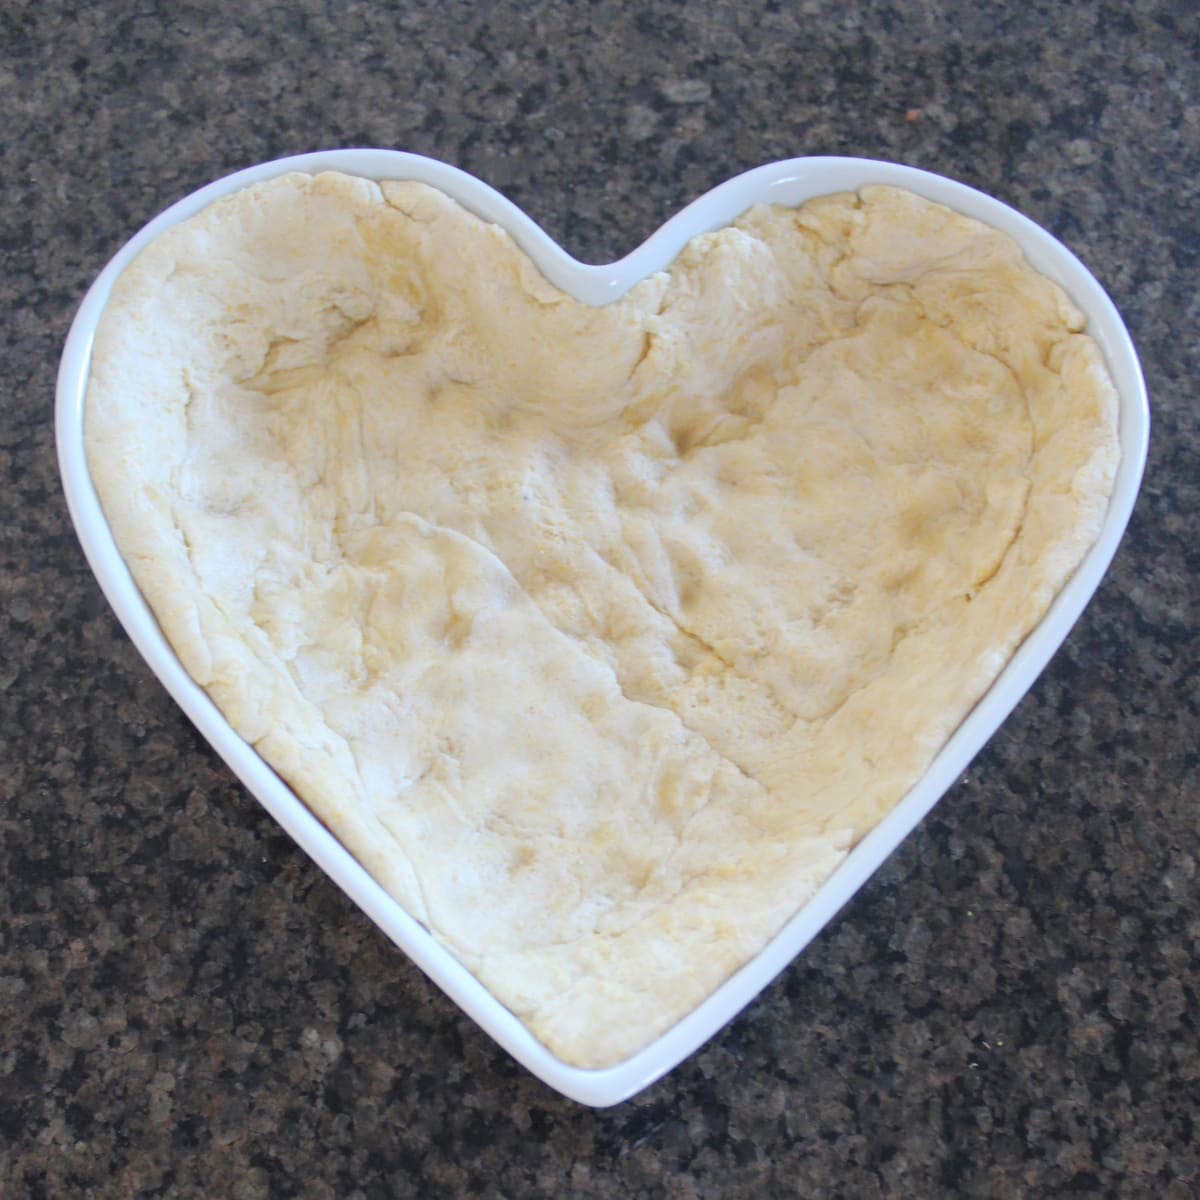 Pizza dough lining the bottom of a heart-shaped pan.